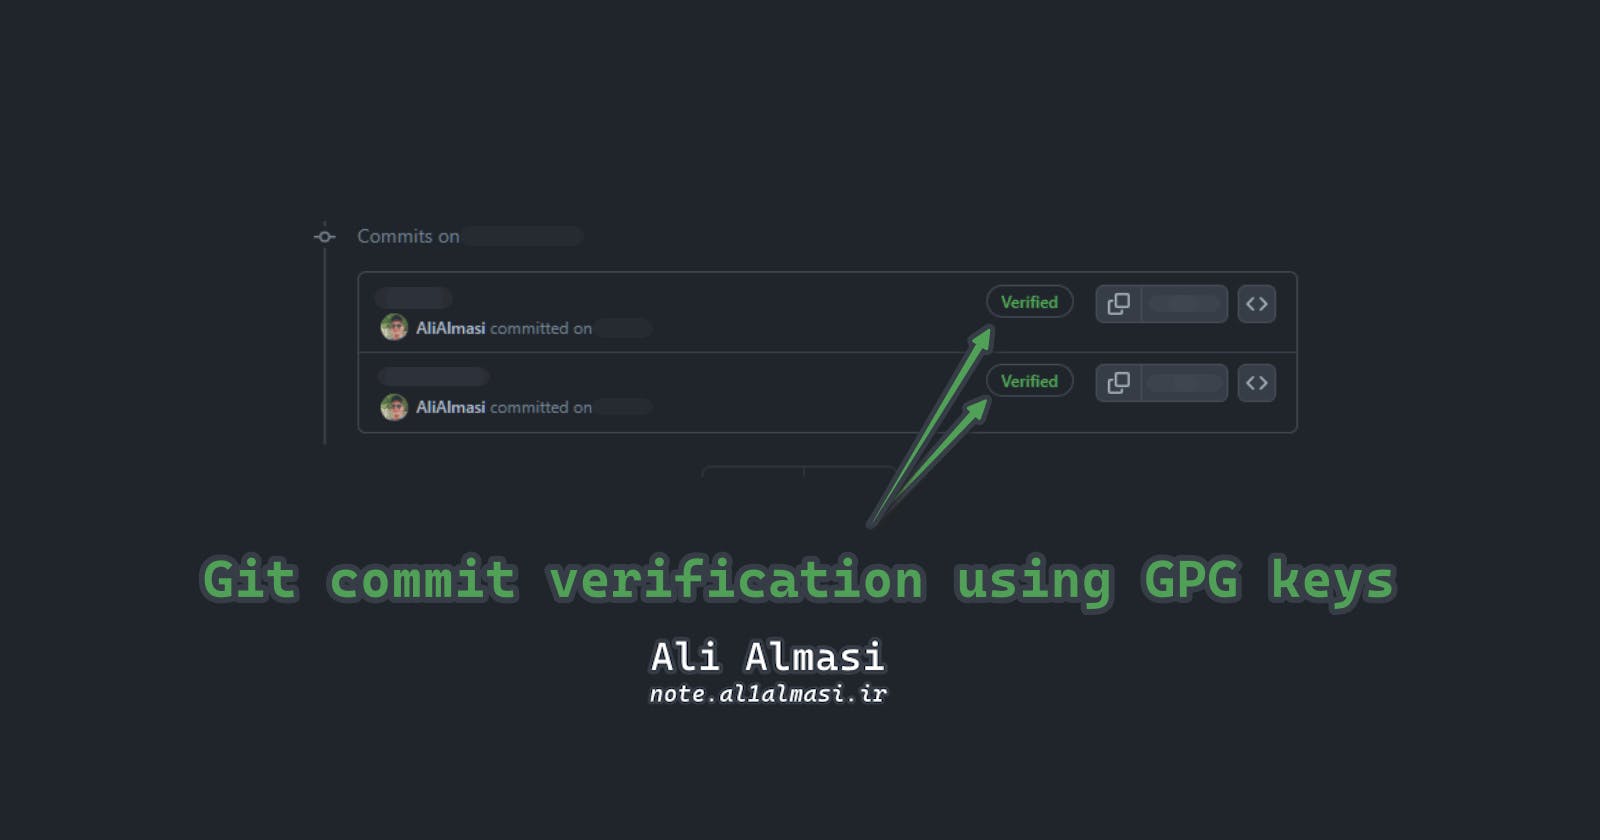 “How to verify git commits” — Easy guide for beginners